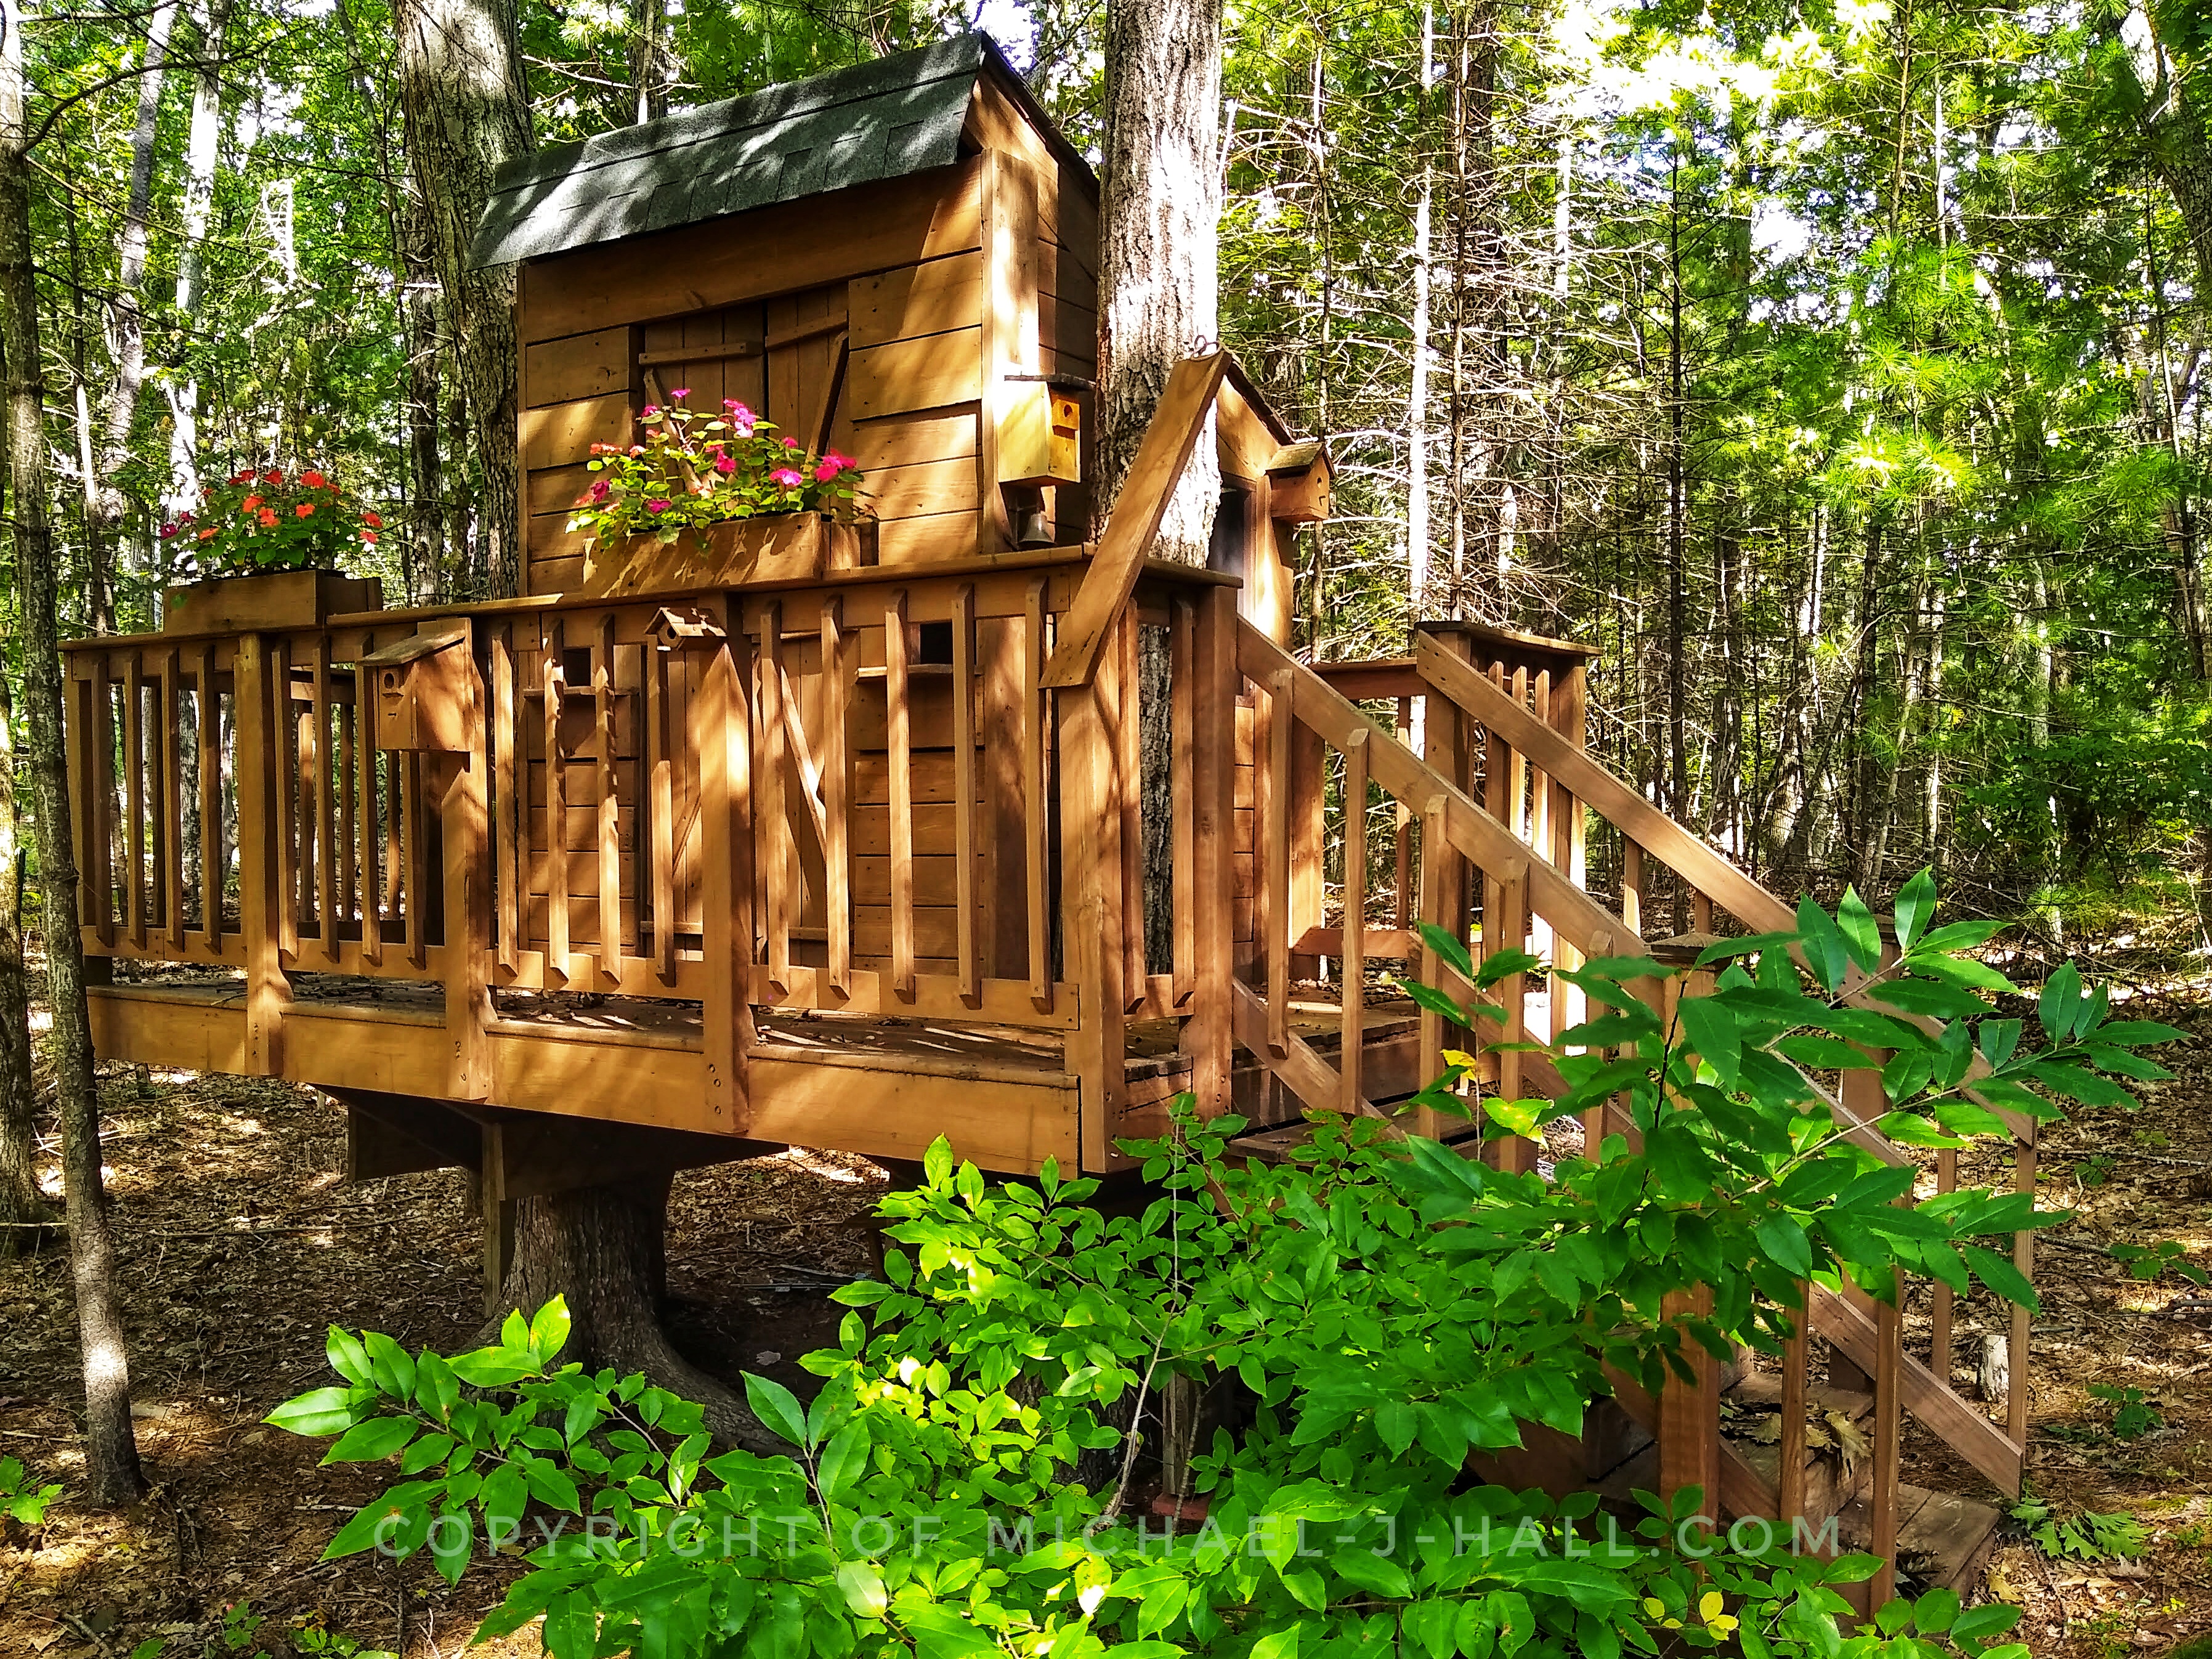 Somewhere in the hundred acre woods is the home of a wise owl - a rustic treehouse tucked between trees invites friends to visit if they happen to be in the neighborhood. Take delight in the views from the wrap around deck, or admire the flower boxes, or gaze into the several birdhouses, or just knock and enter.